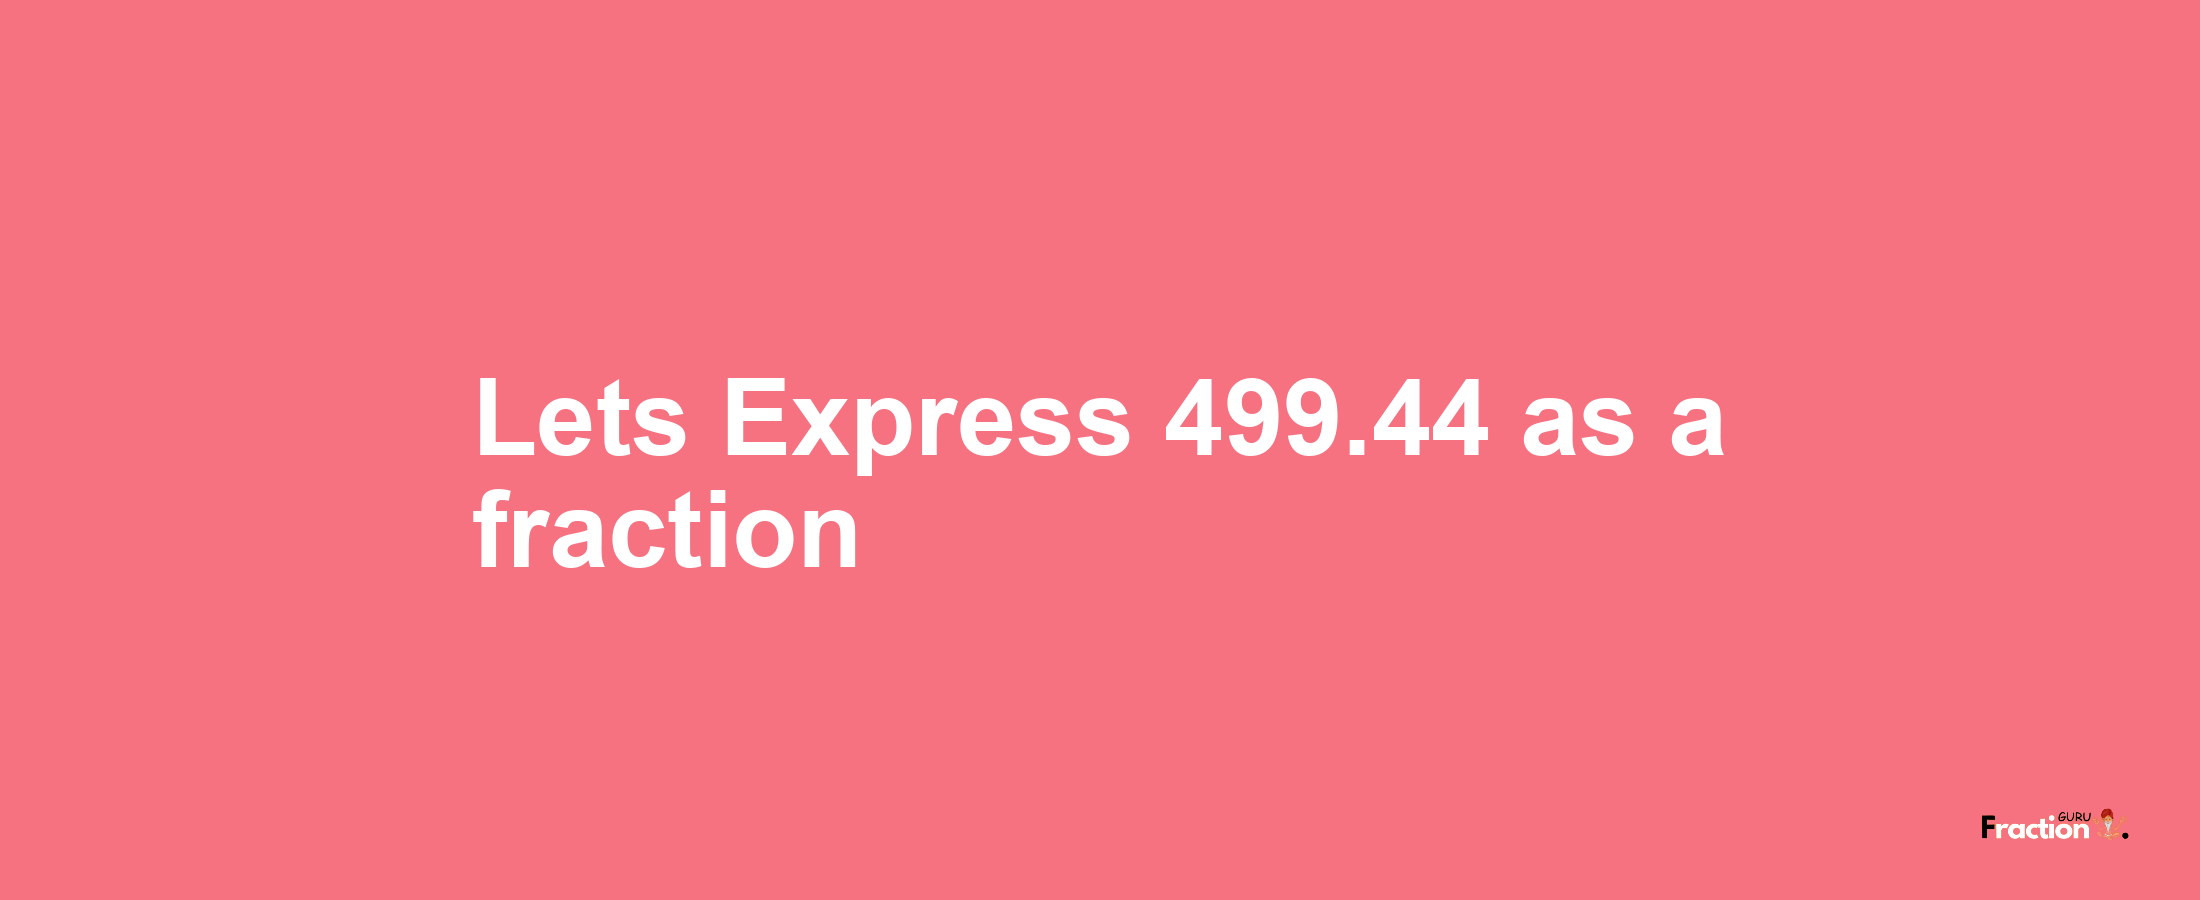 Lets Express 499.44 as afraction